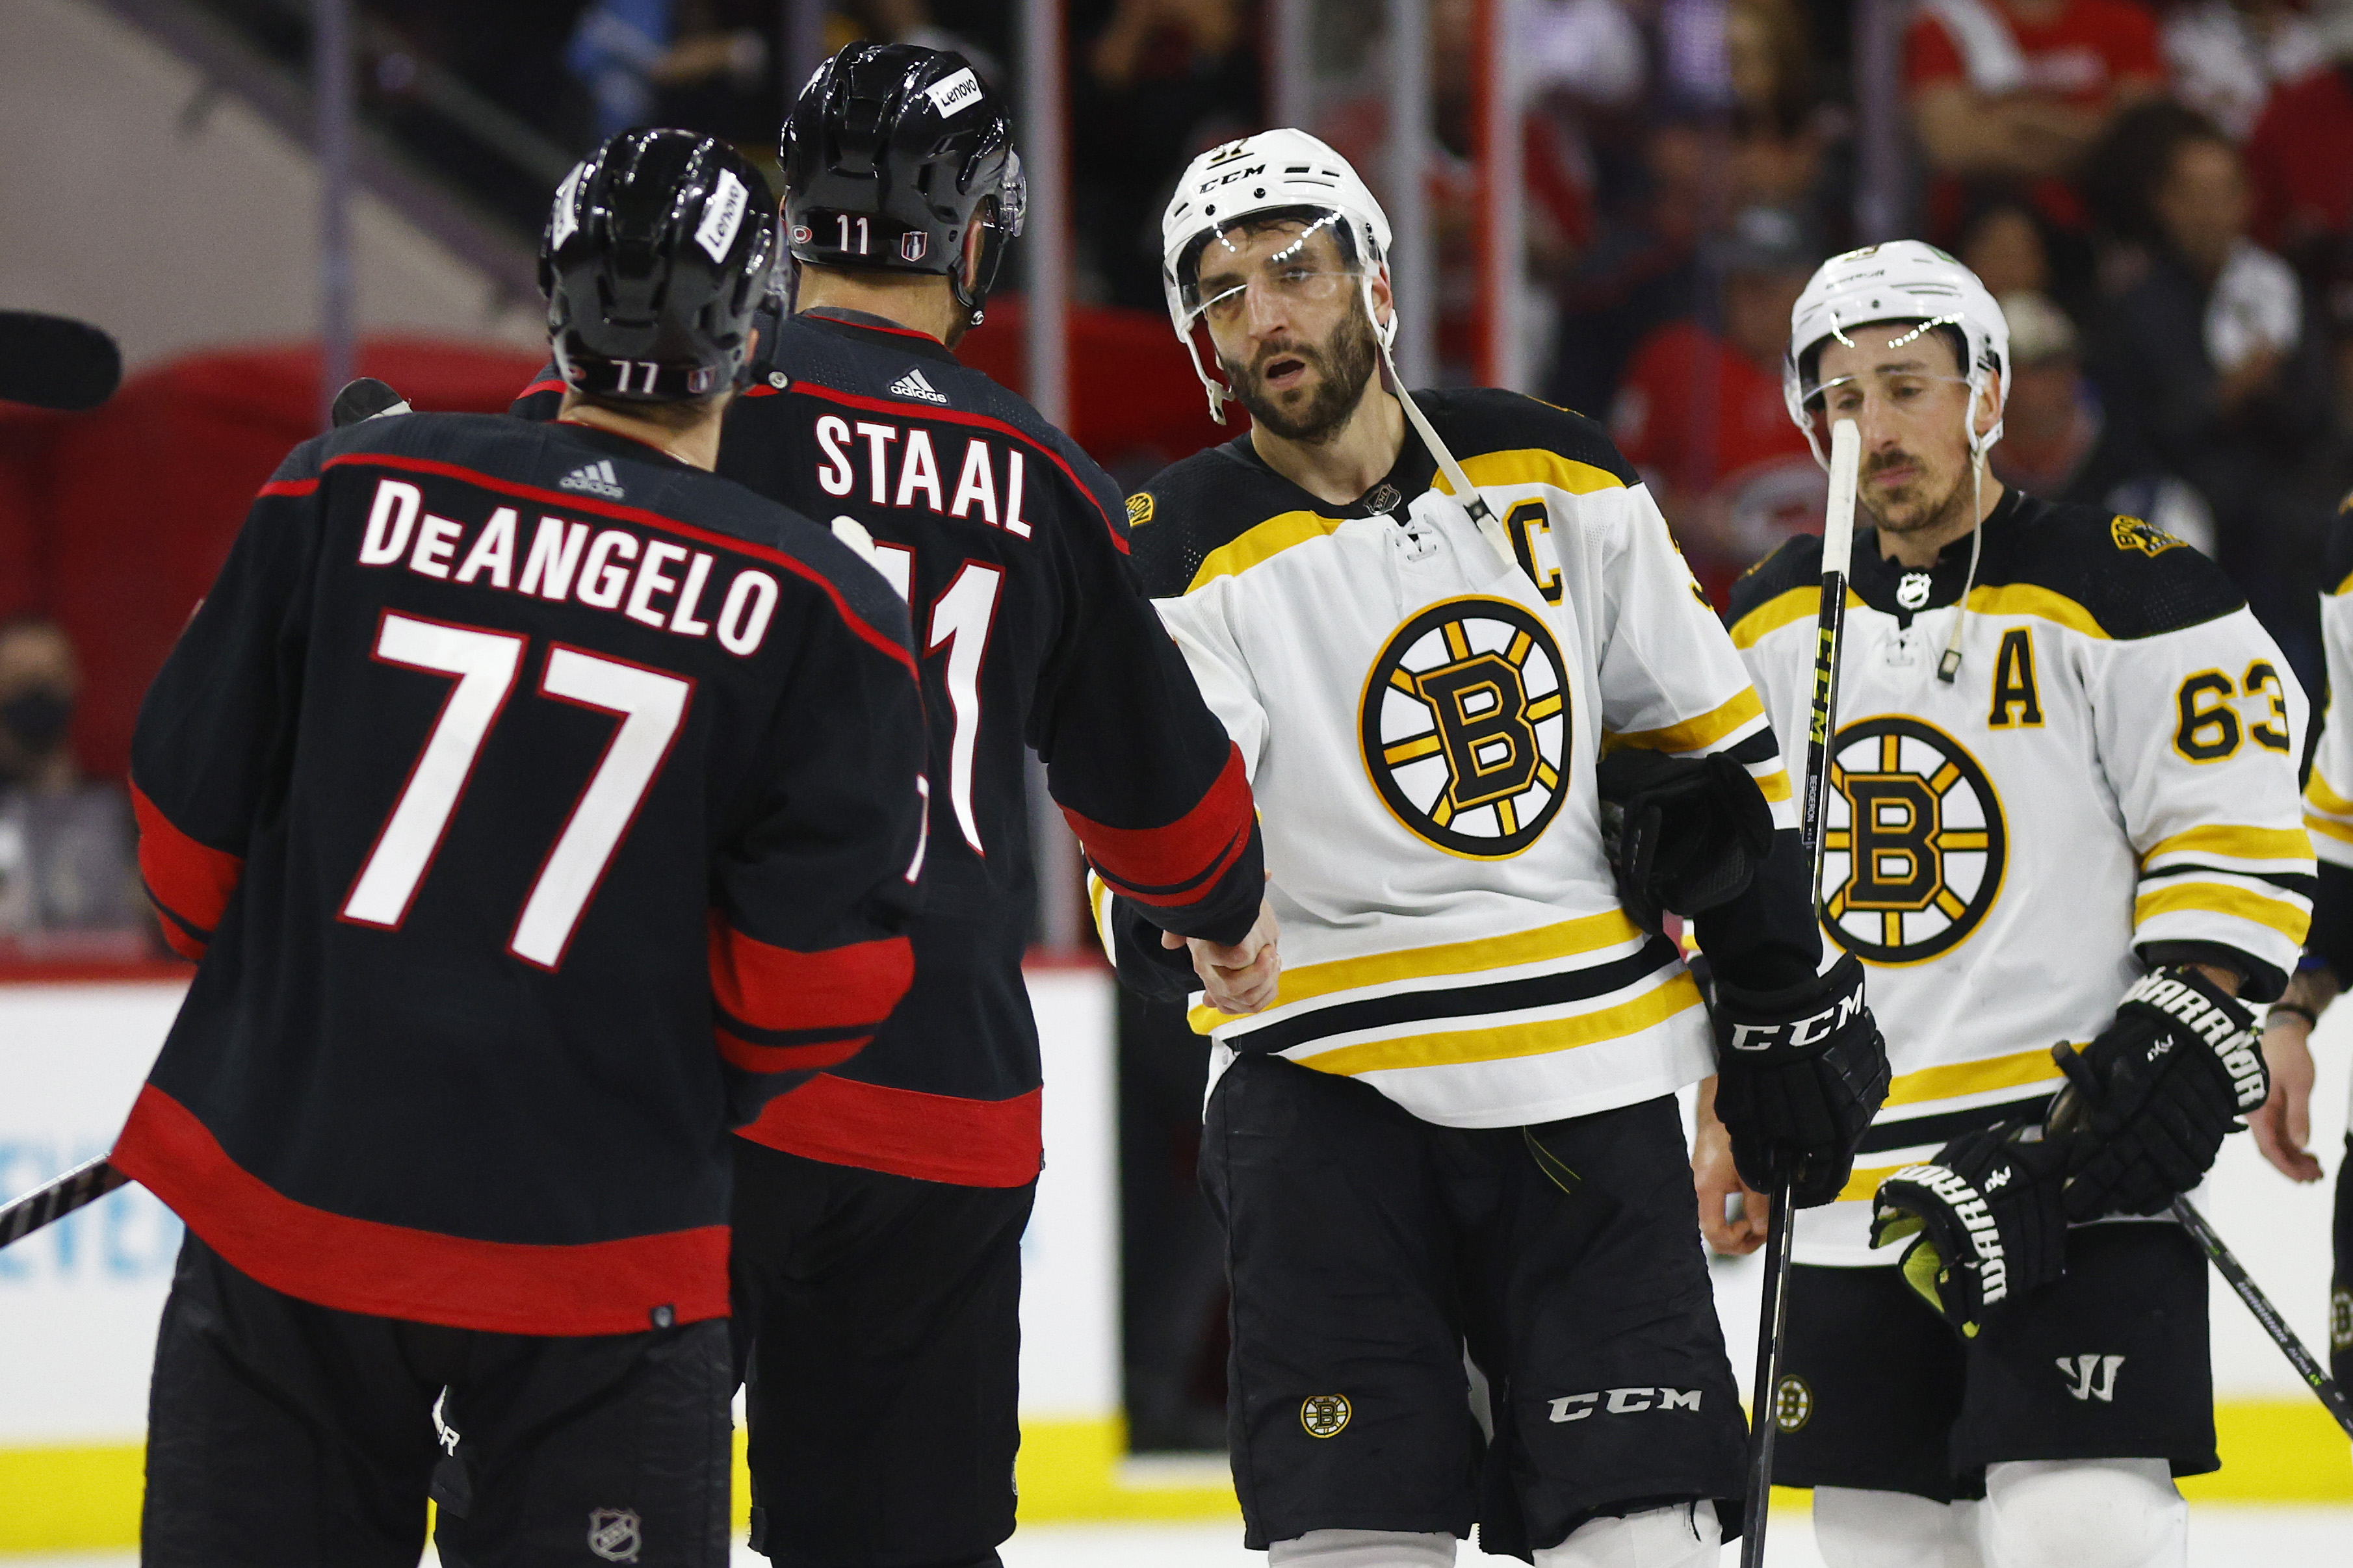 Brad Marchand drags Bruins into fight in debut as team captain